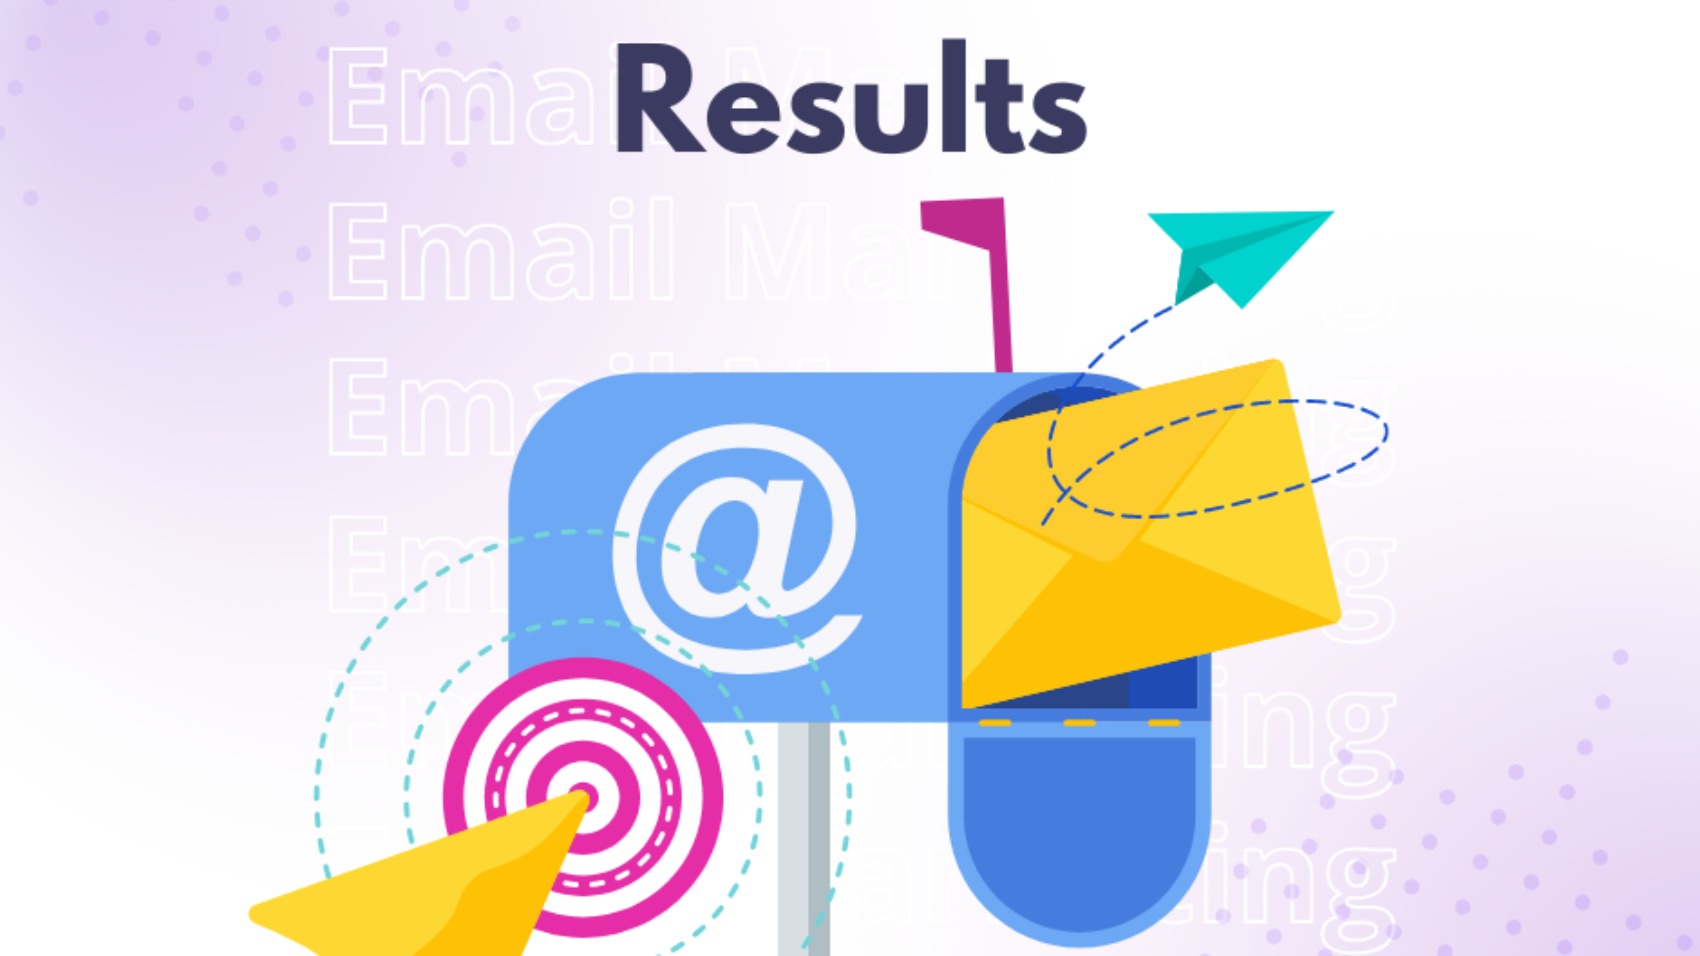 "Five Psychological Hacks to Write Emails That Get Results"